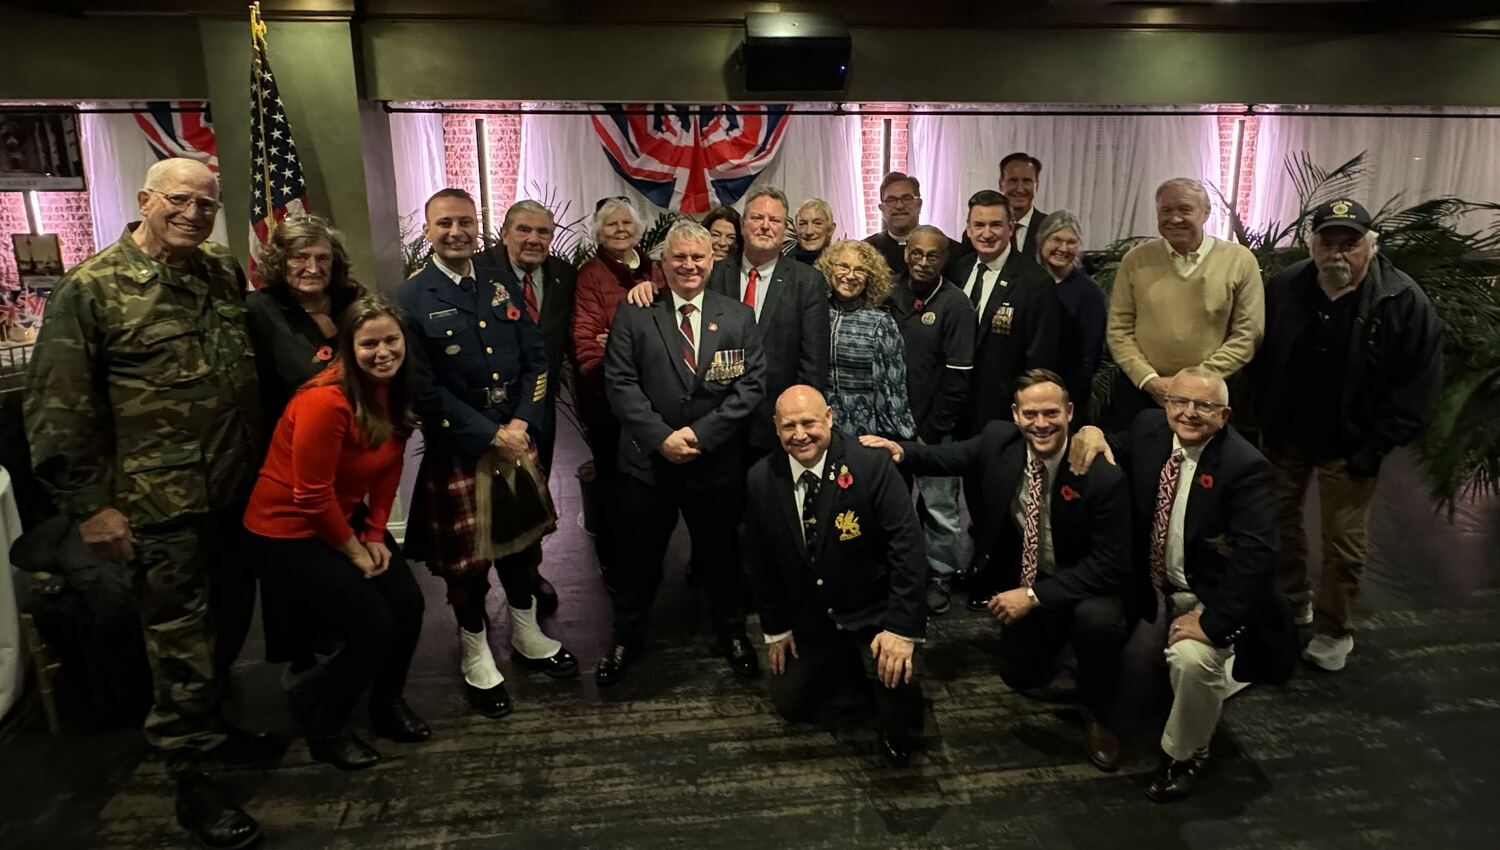 The Commission on Veterans Patriotic Events hosted a dinner on Sunday night at Union Steak & Sushi for the two British veterans from Southampton, England, who visited the area over Veterans Day weekend. COURTESY SUSAN STEINKE